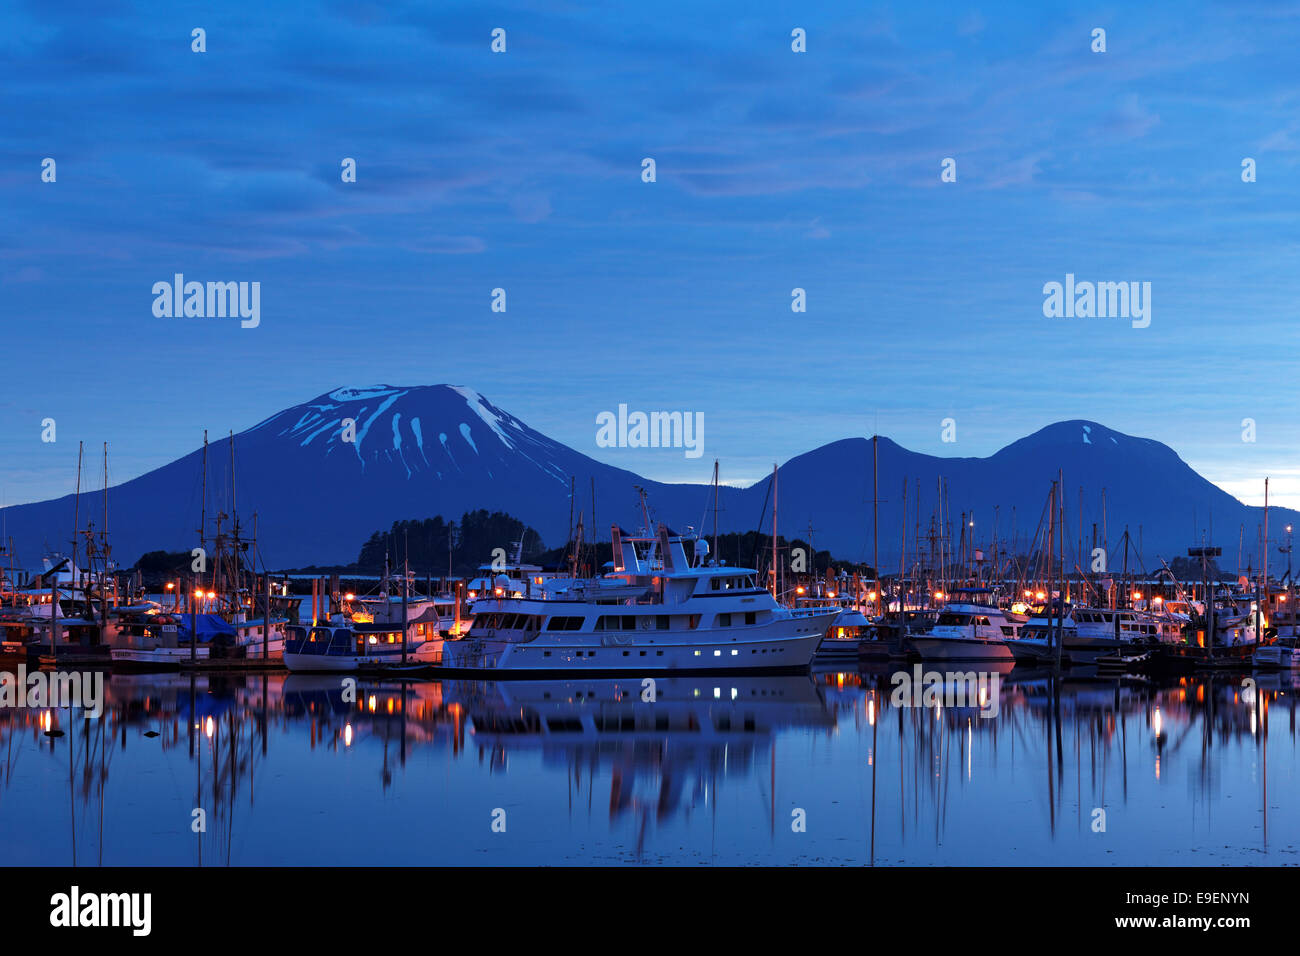 Boats in marina at New Thomsen Harbor with Mount Edgecomb in background, Sitka Harbor, Alaska, USA Stock Photo